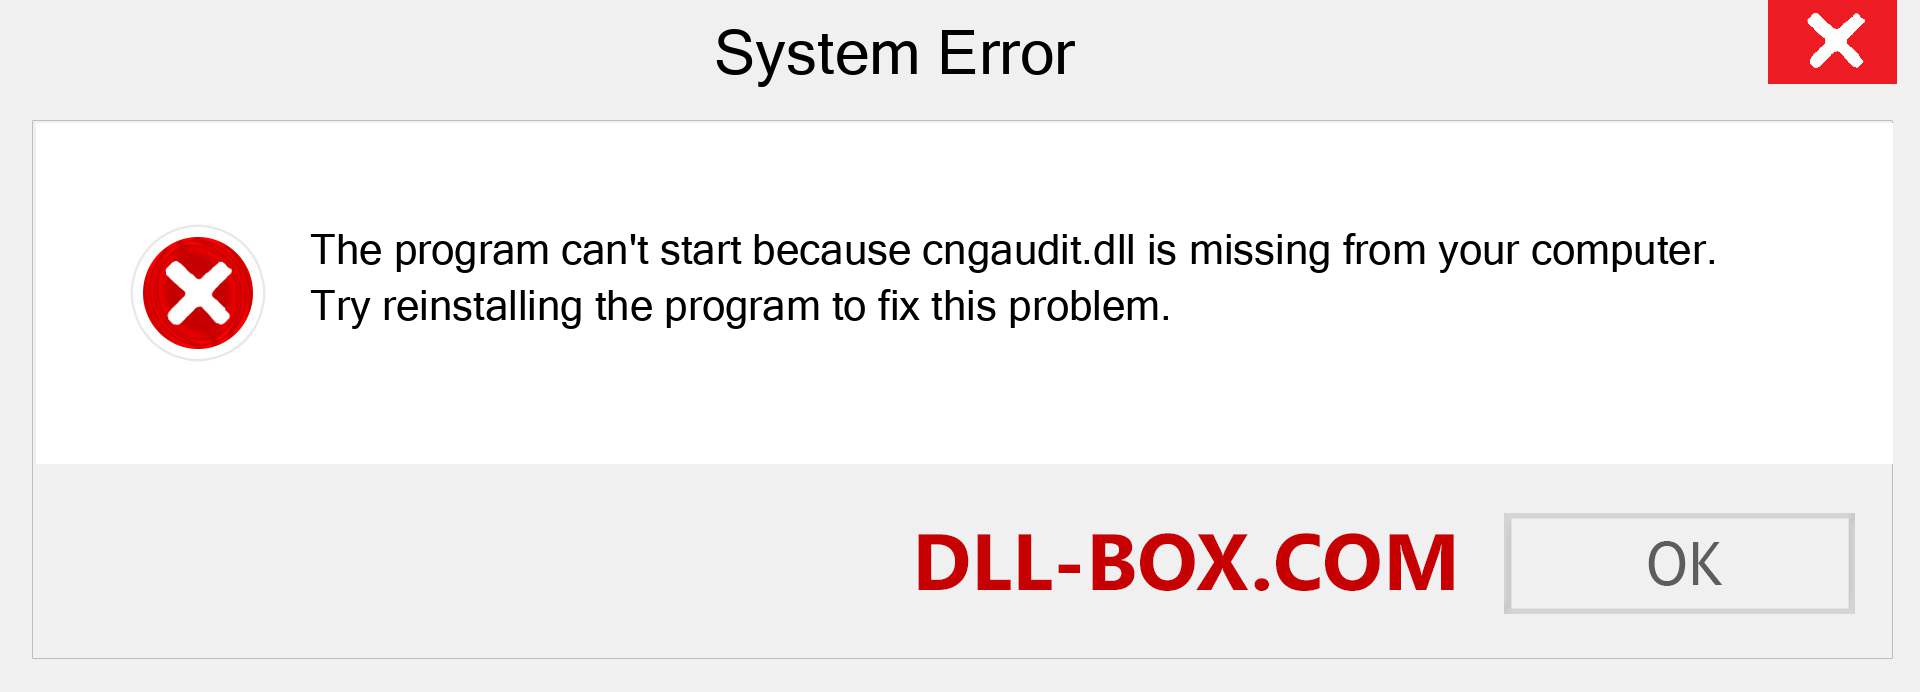  cngaudit.dll file is missing?. Download for Windows 7, 8, 10 - Fix  cngaudit dll Missing Error on Windows, photos, images